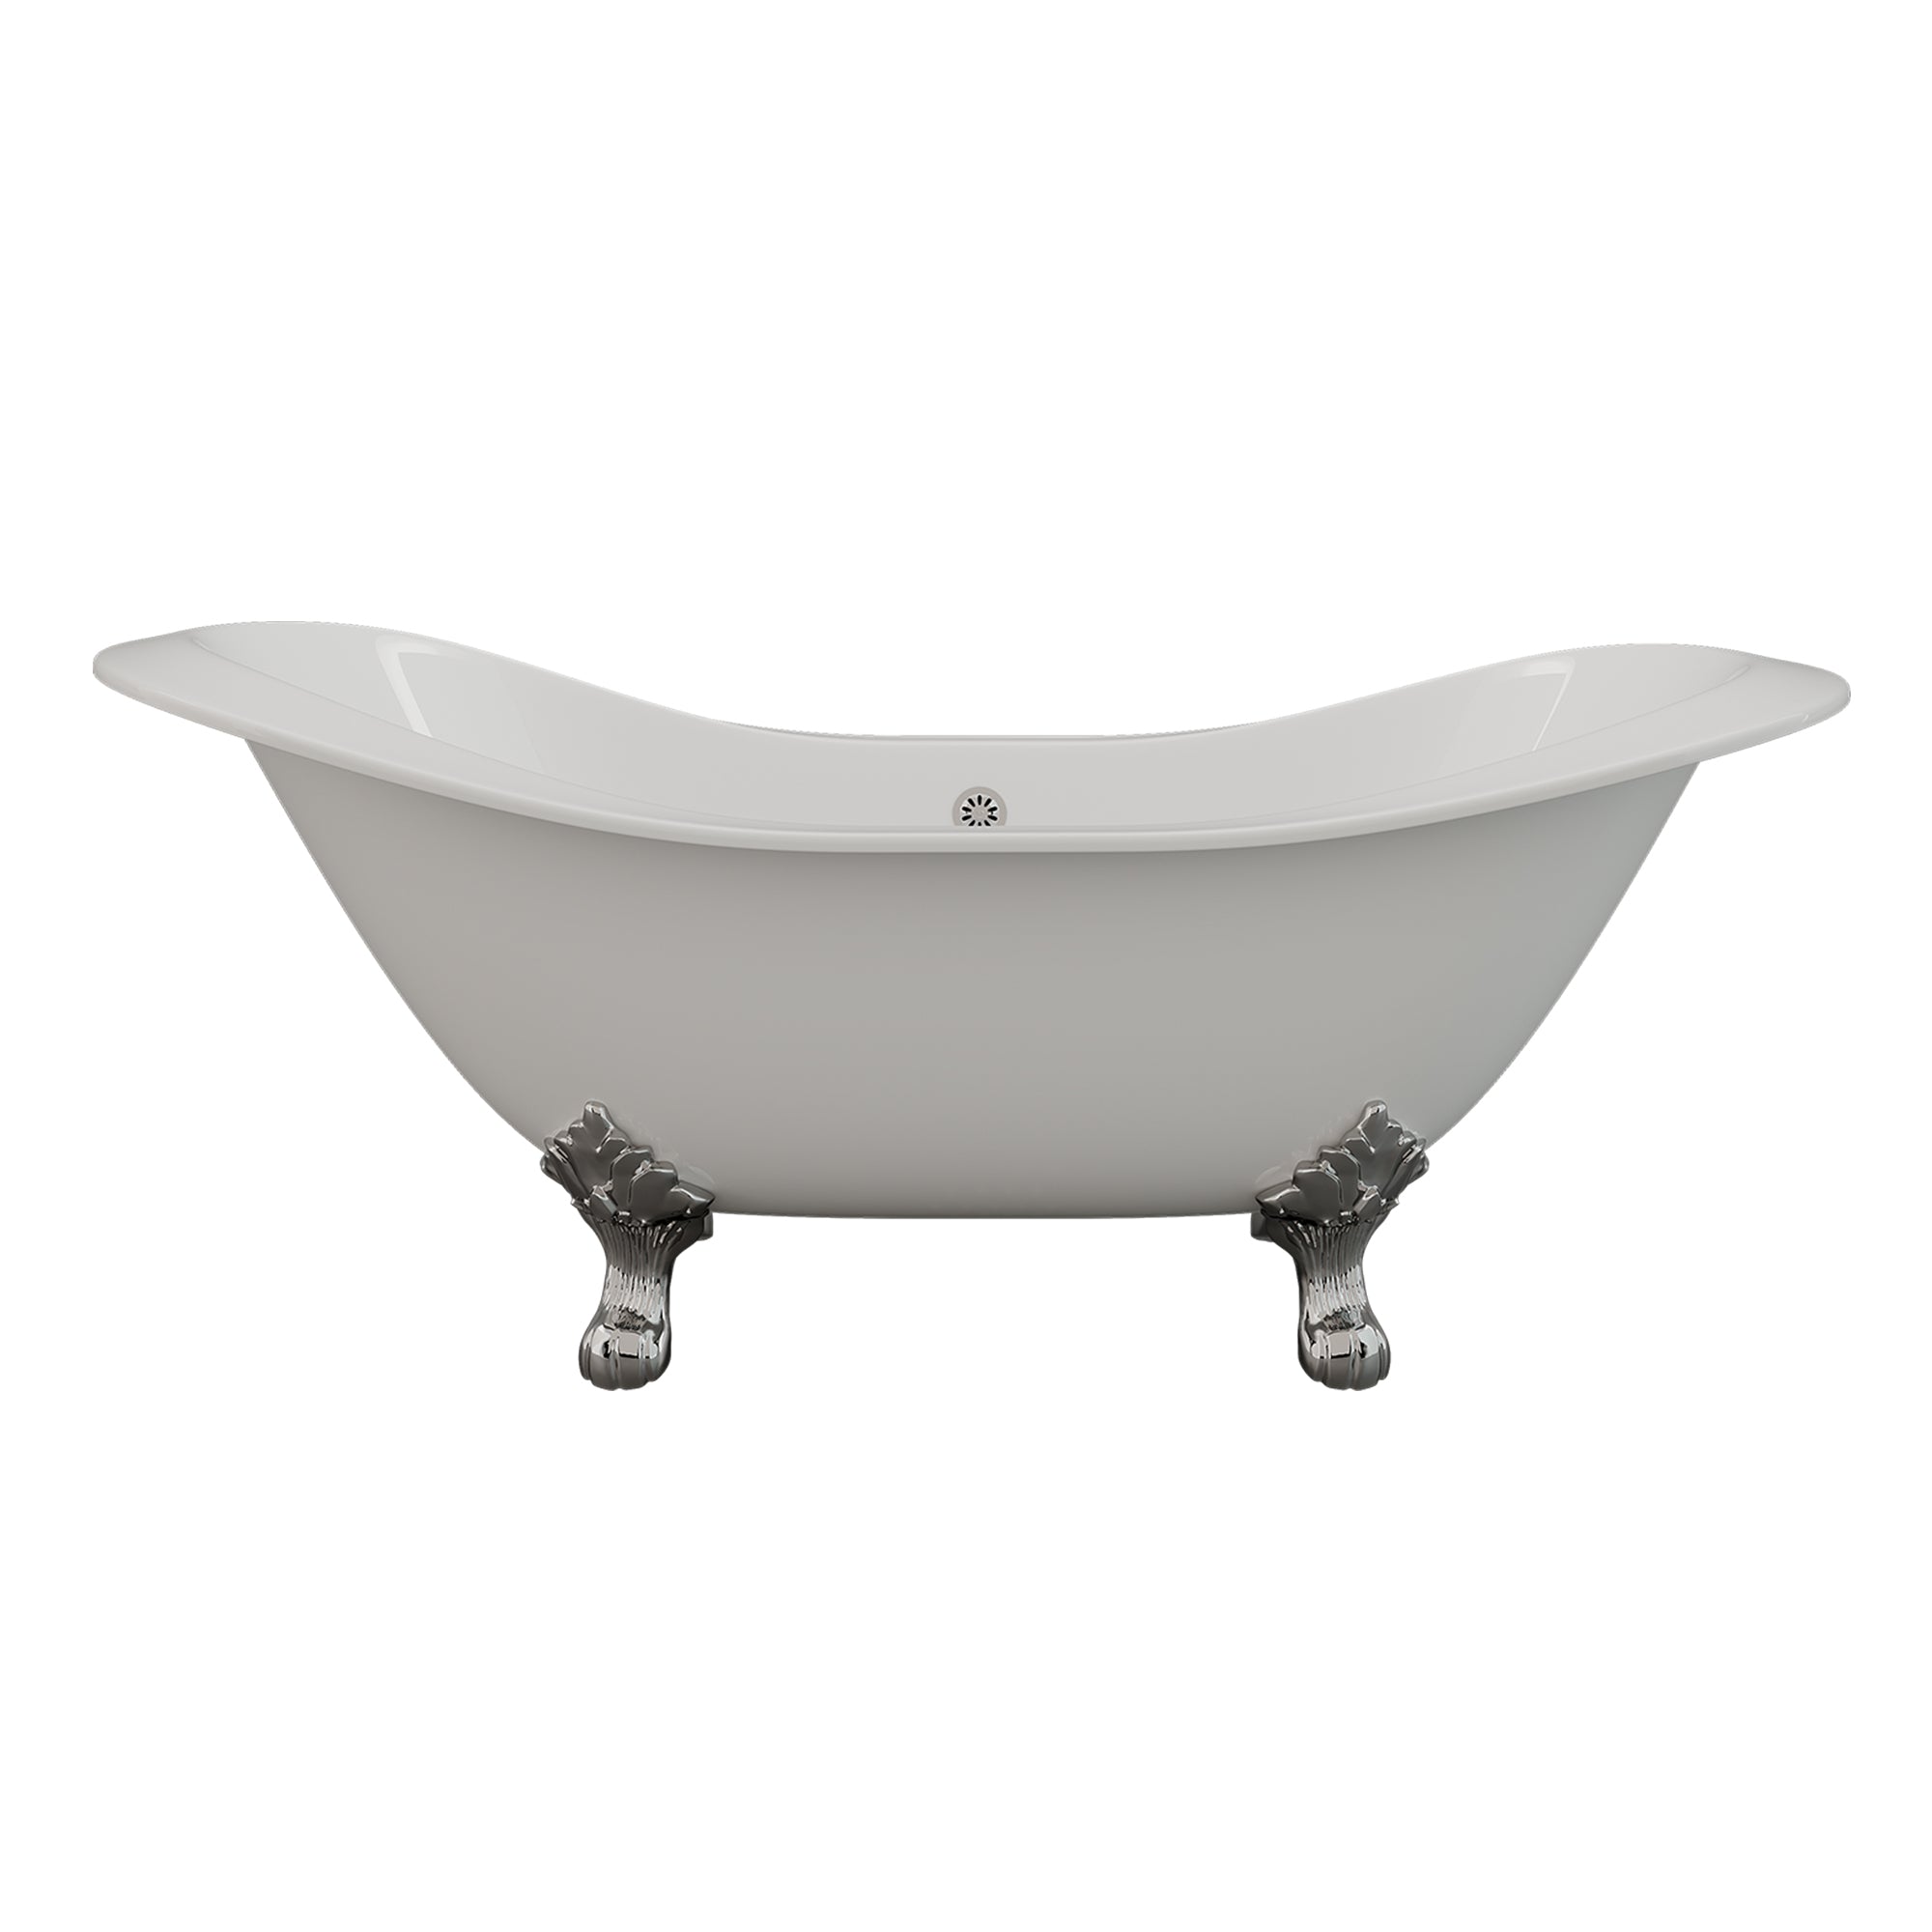 Cambridge Plumbing  72" X 31" Double Ended Cast Iron Slipper Tub (porcelain enamel interior, white paint exterior) with No Faucet Drillings and Feet (Brushed nickel) DES-NH - Vital Hydrotherapy